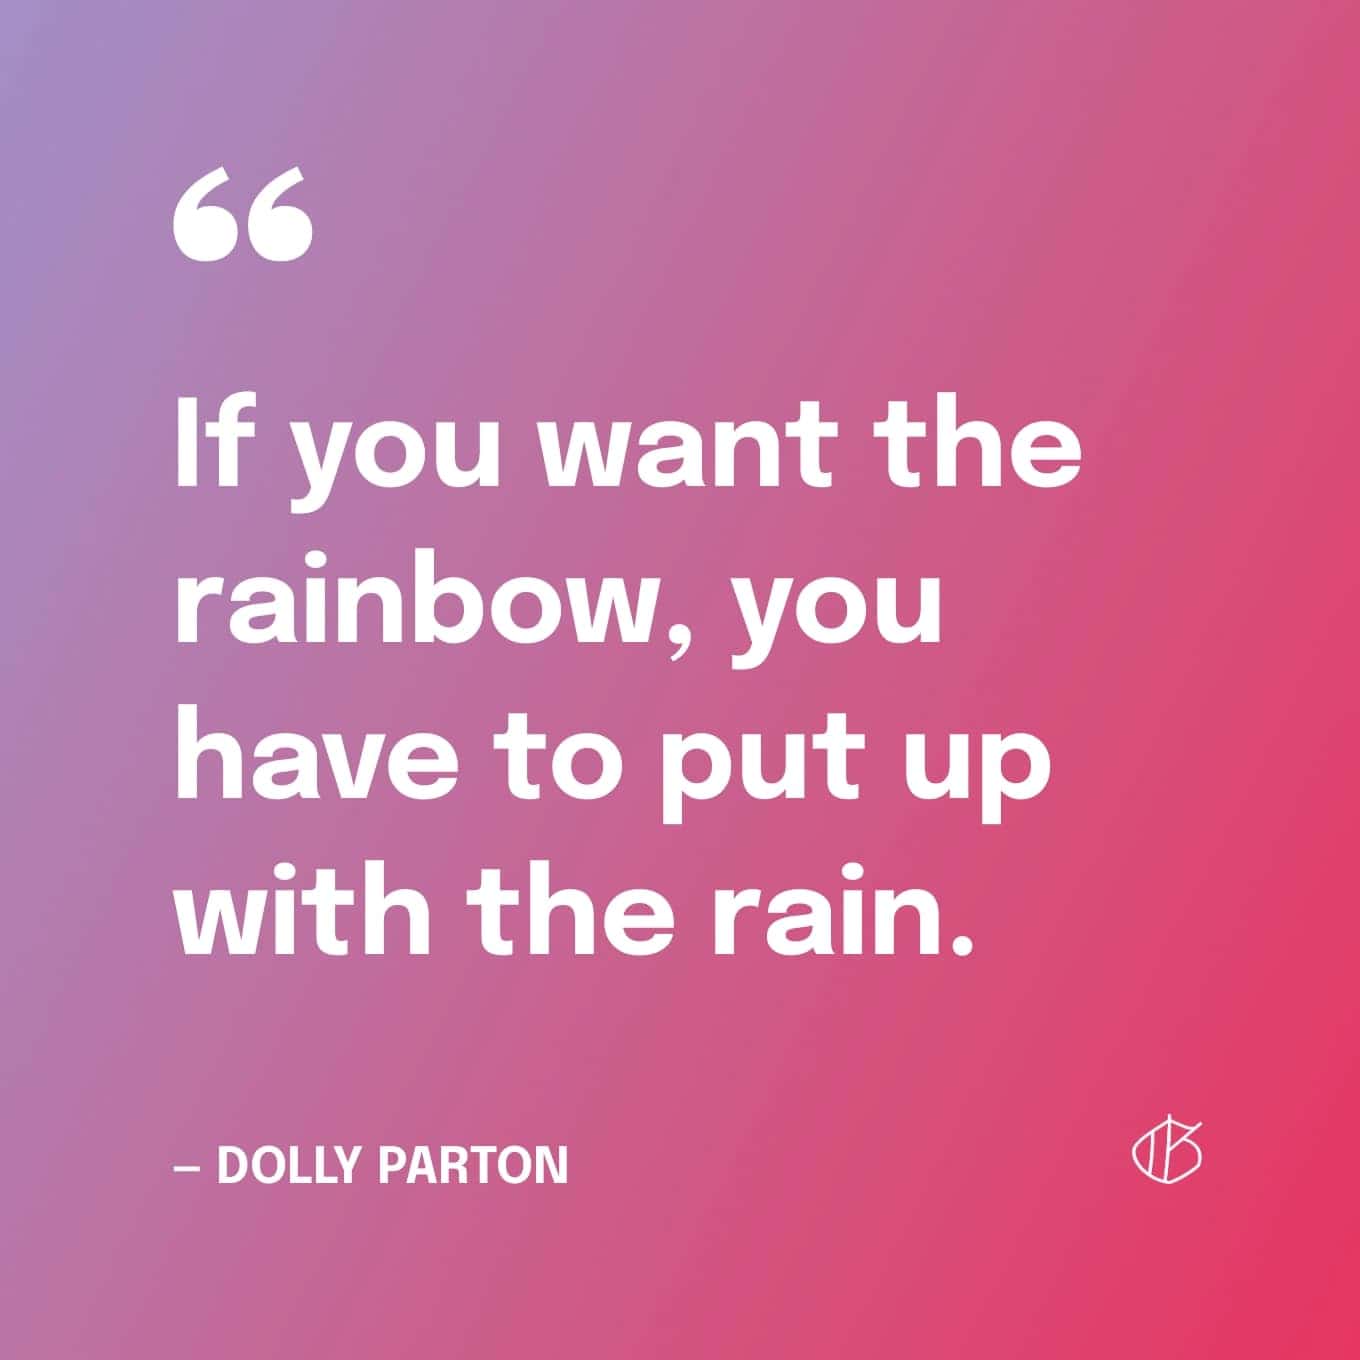 Dolly Parton Quote Wallpaper: “If you want the rainbow, you have to put up with the rain.”